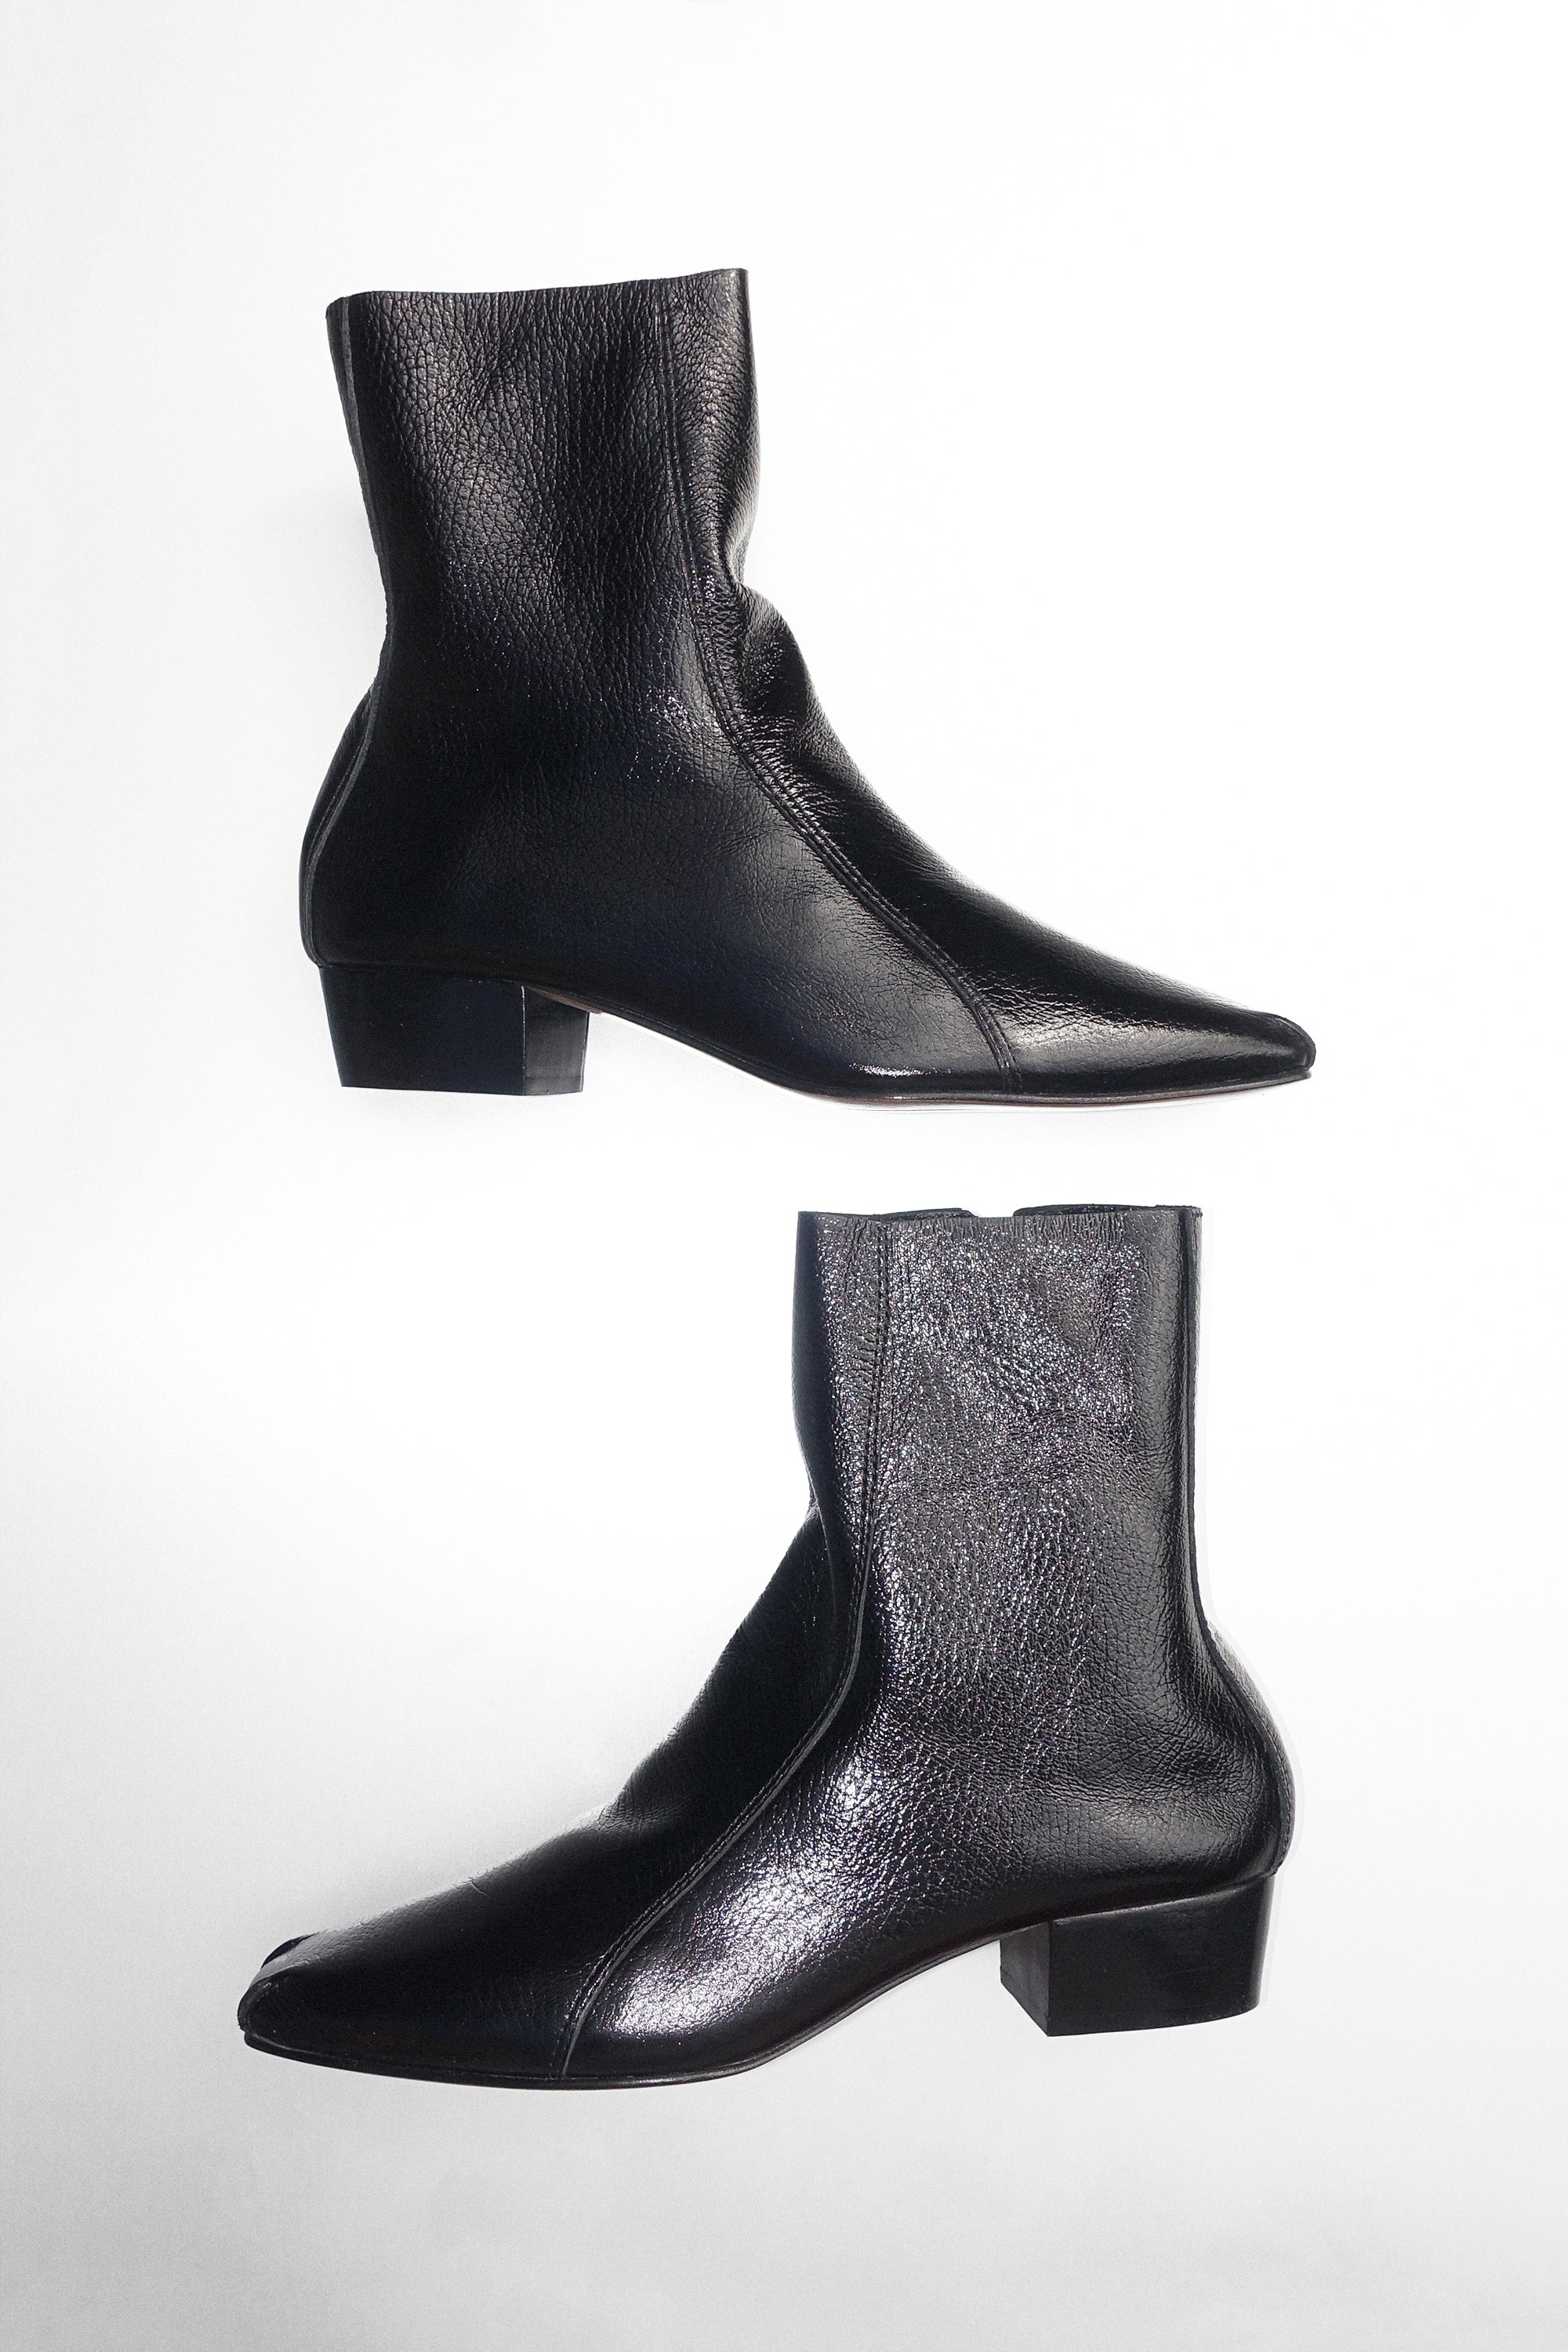 Cove Boot in Black Patent Leather